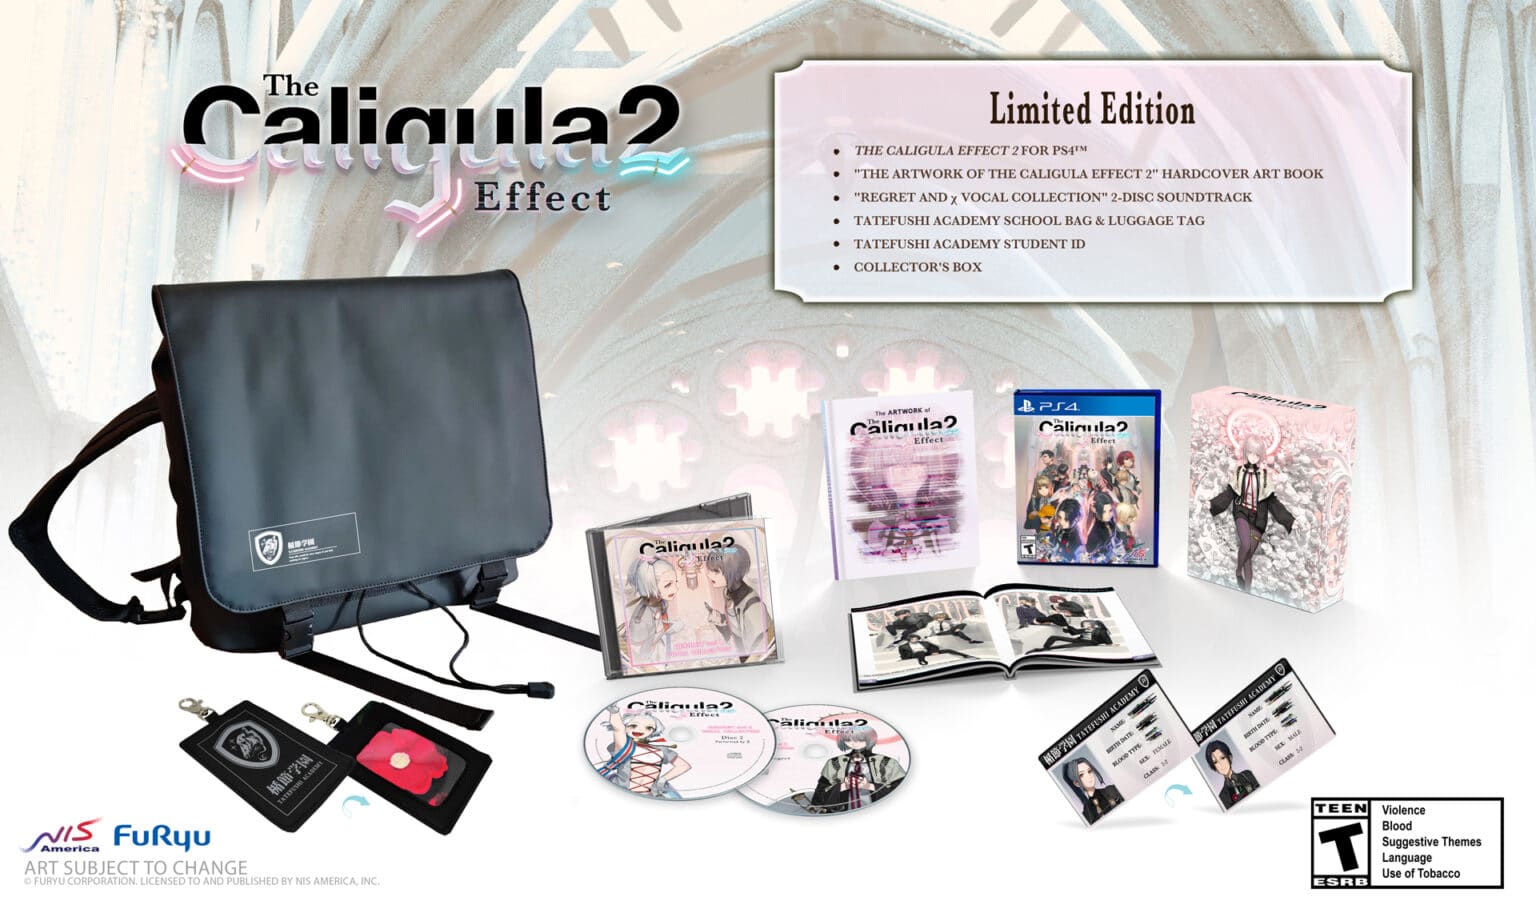 download the last version for windows The Caligula Effect 2